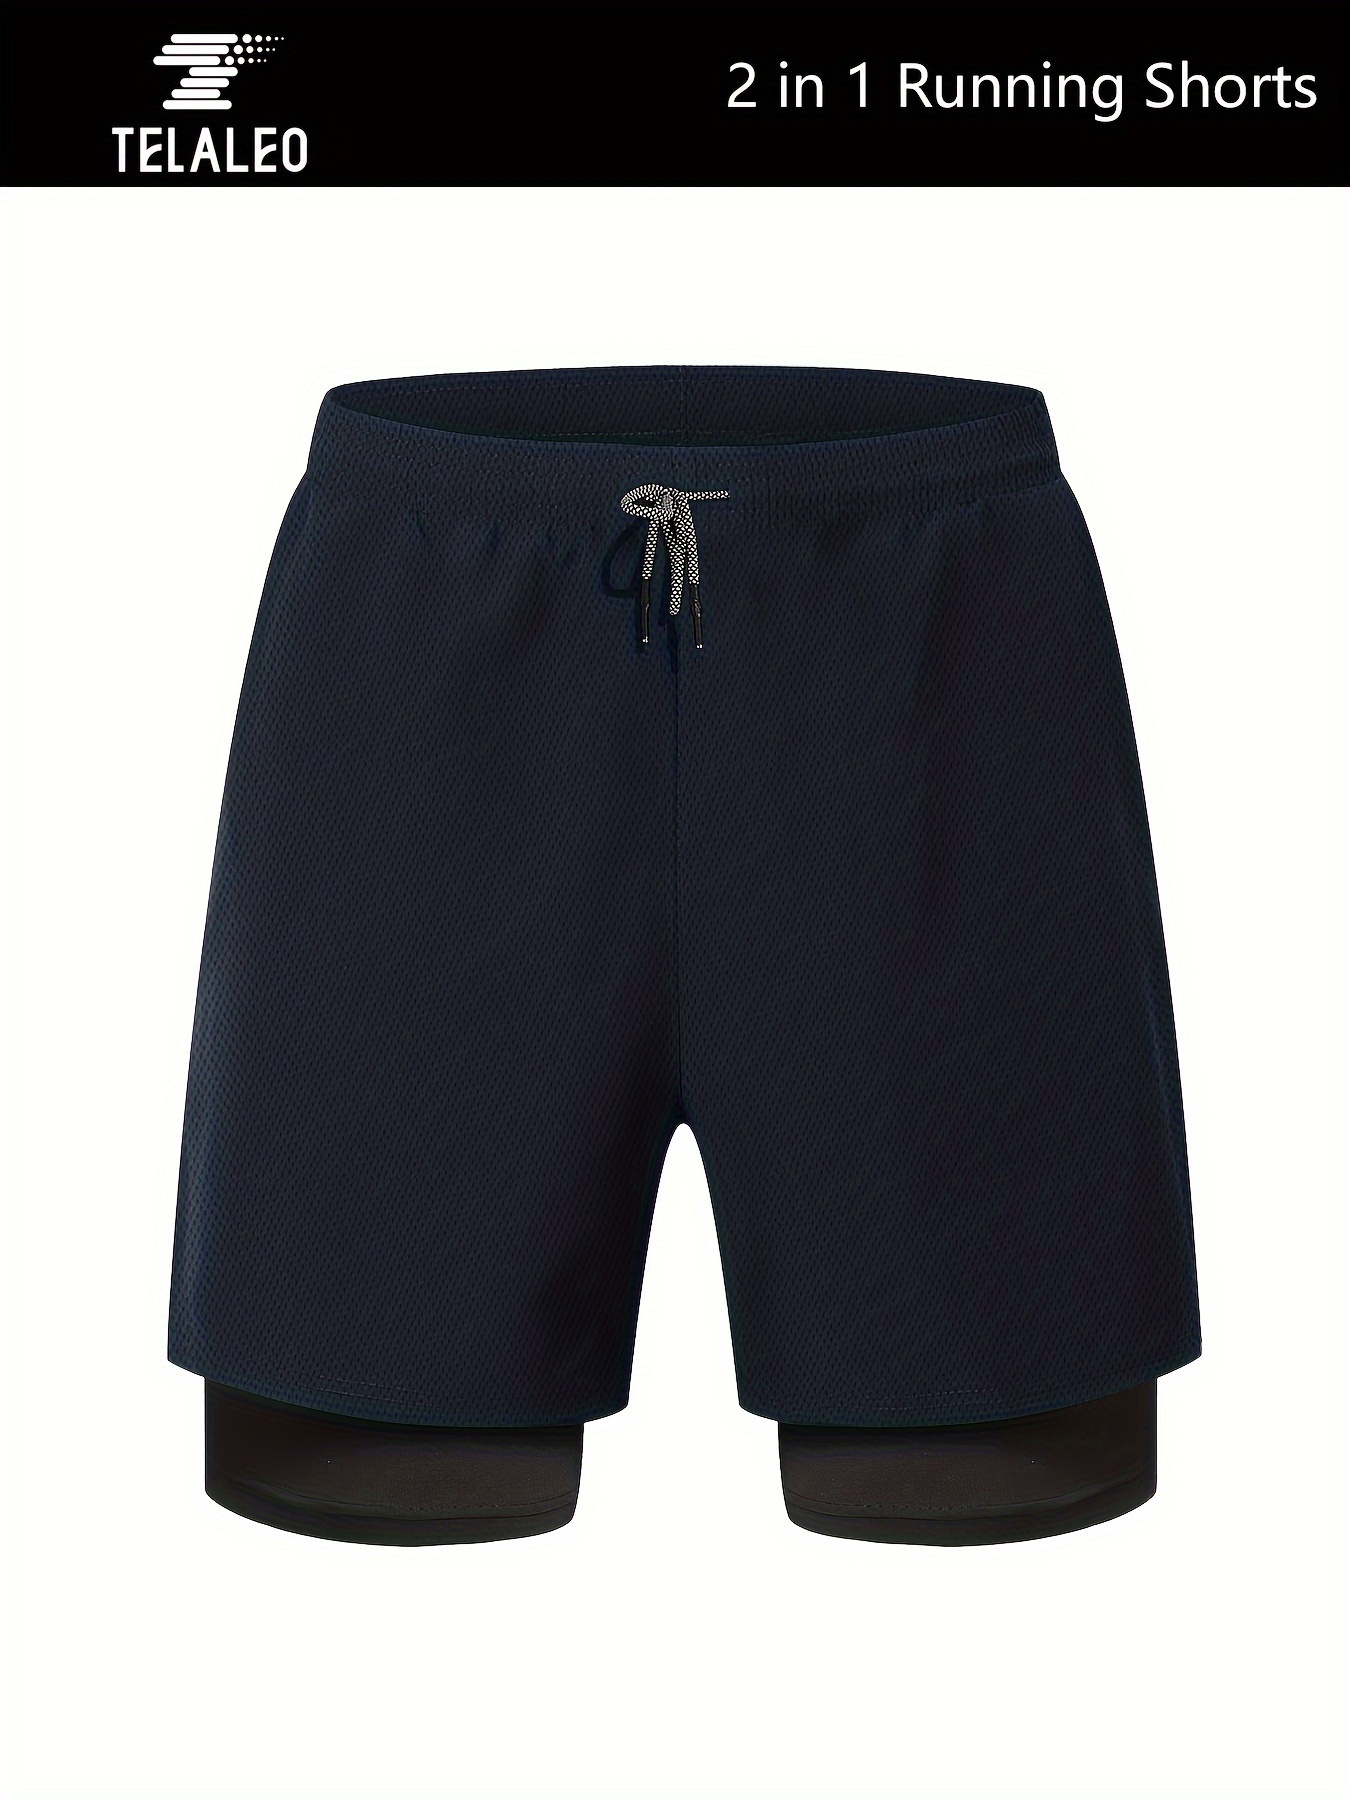 Men's Workout Shorts: Compression-Lined & Running Shorts